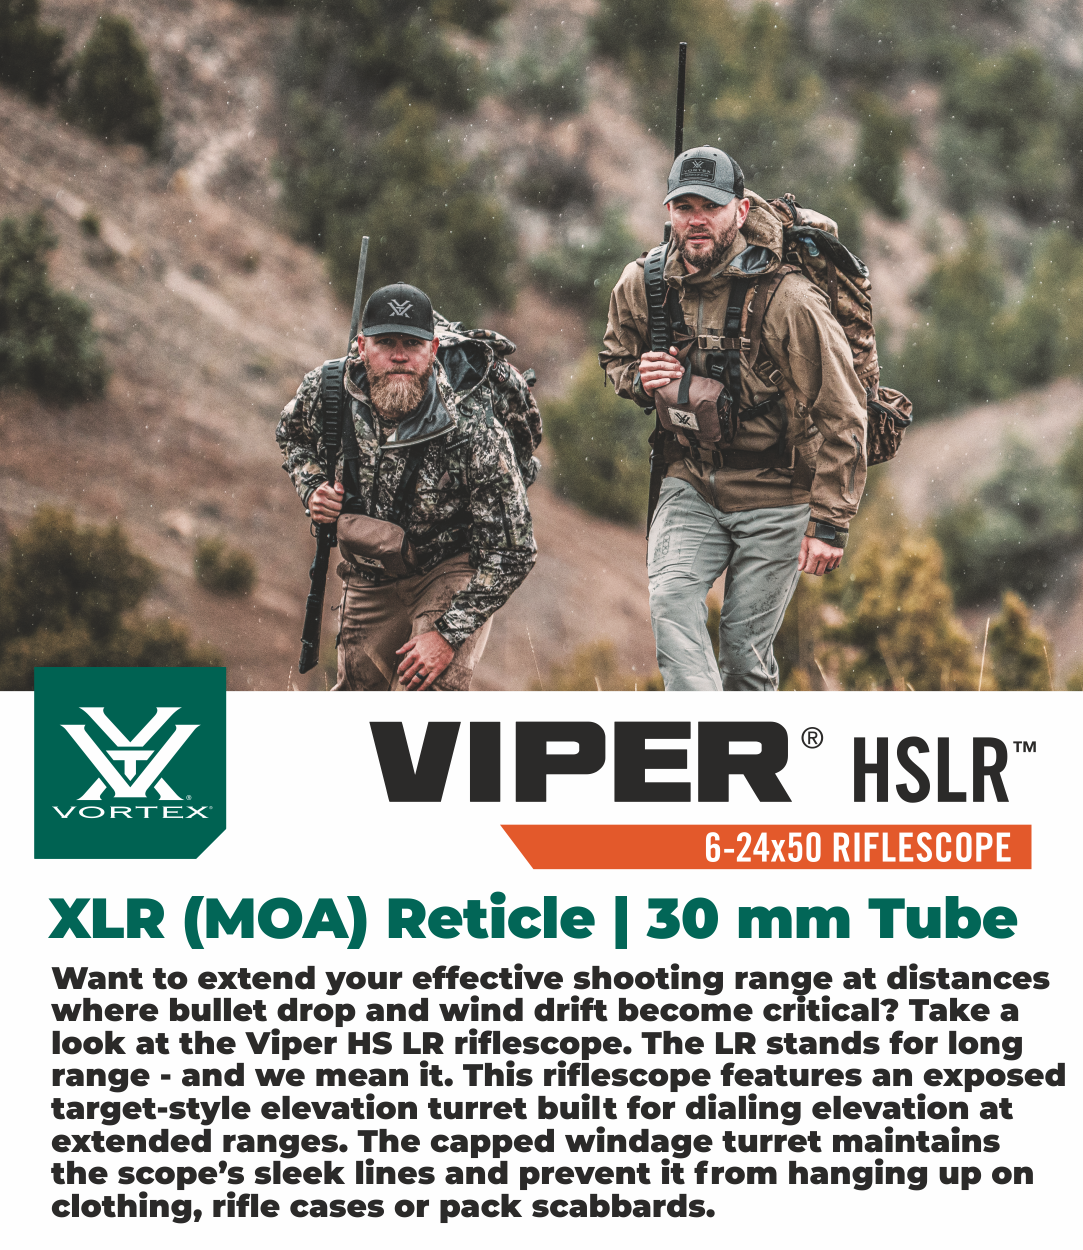 Vortex Optics Viper HSLR 6-24X50 XLR (MOA) Reticle First Focal Plane, 30 mm Tube with Free Hat Bundle - image 2 of 7